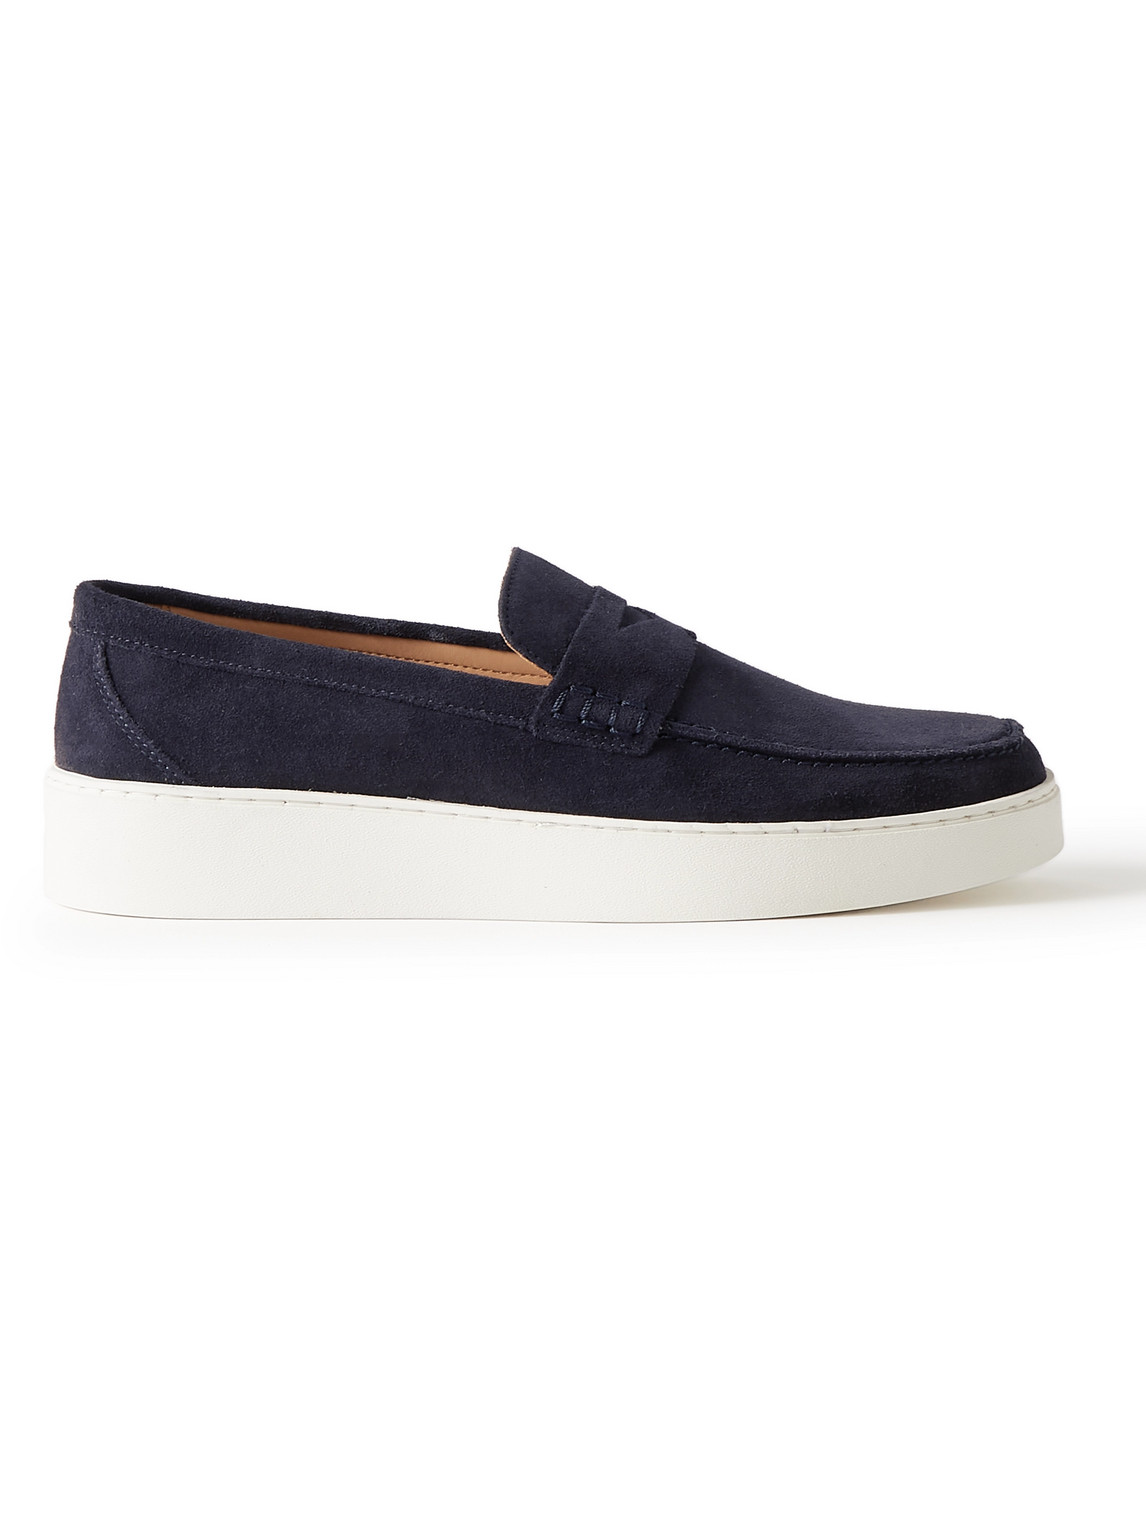 Peter Suede Penny Loafers